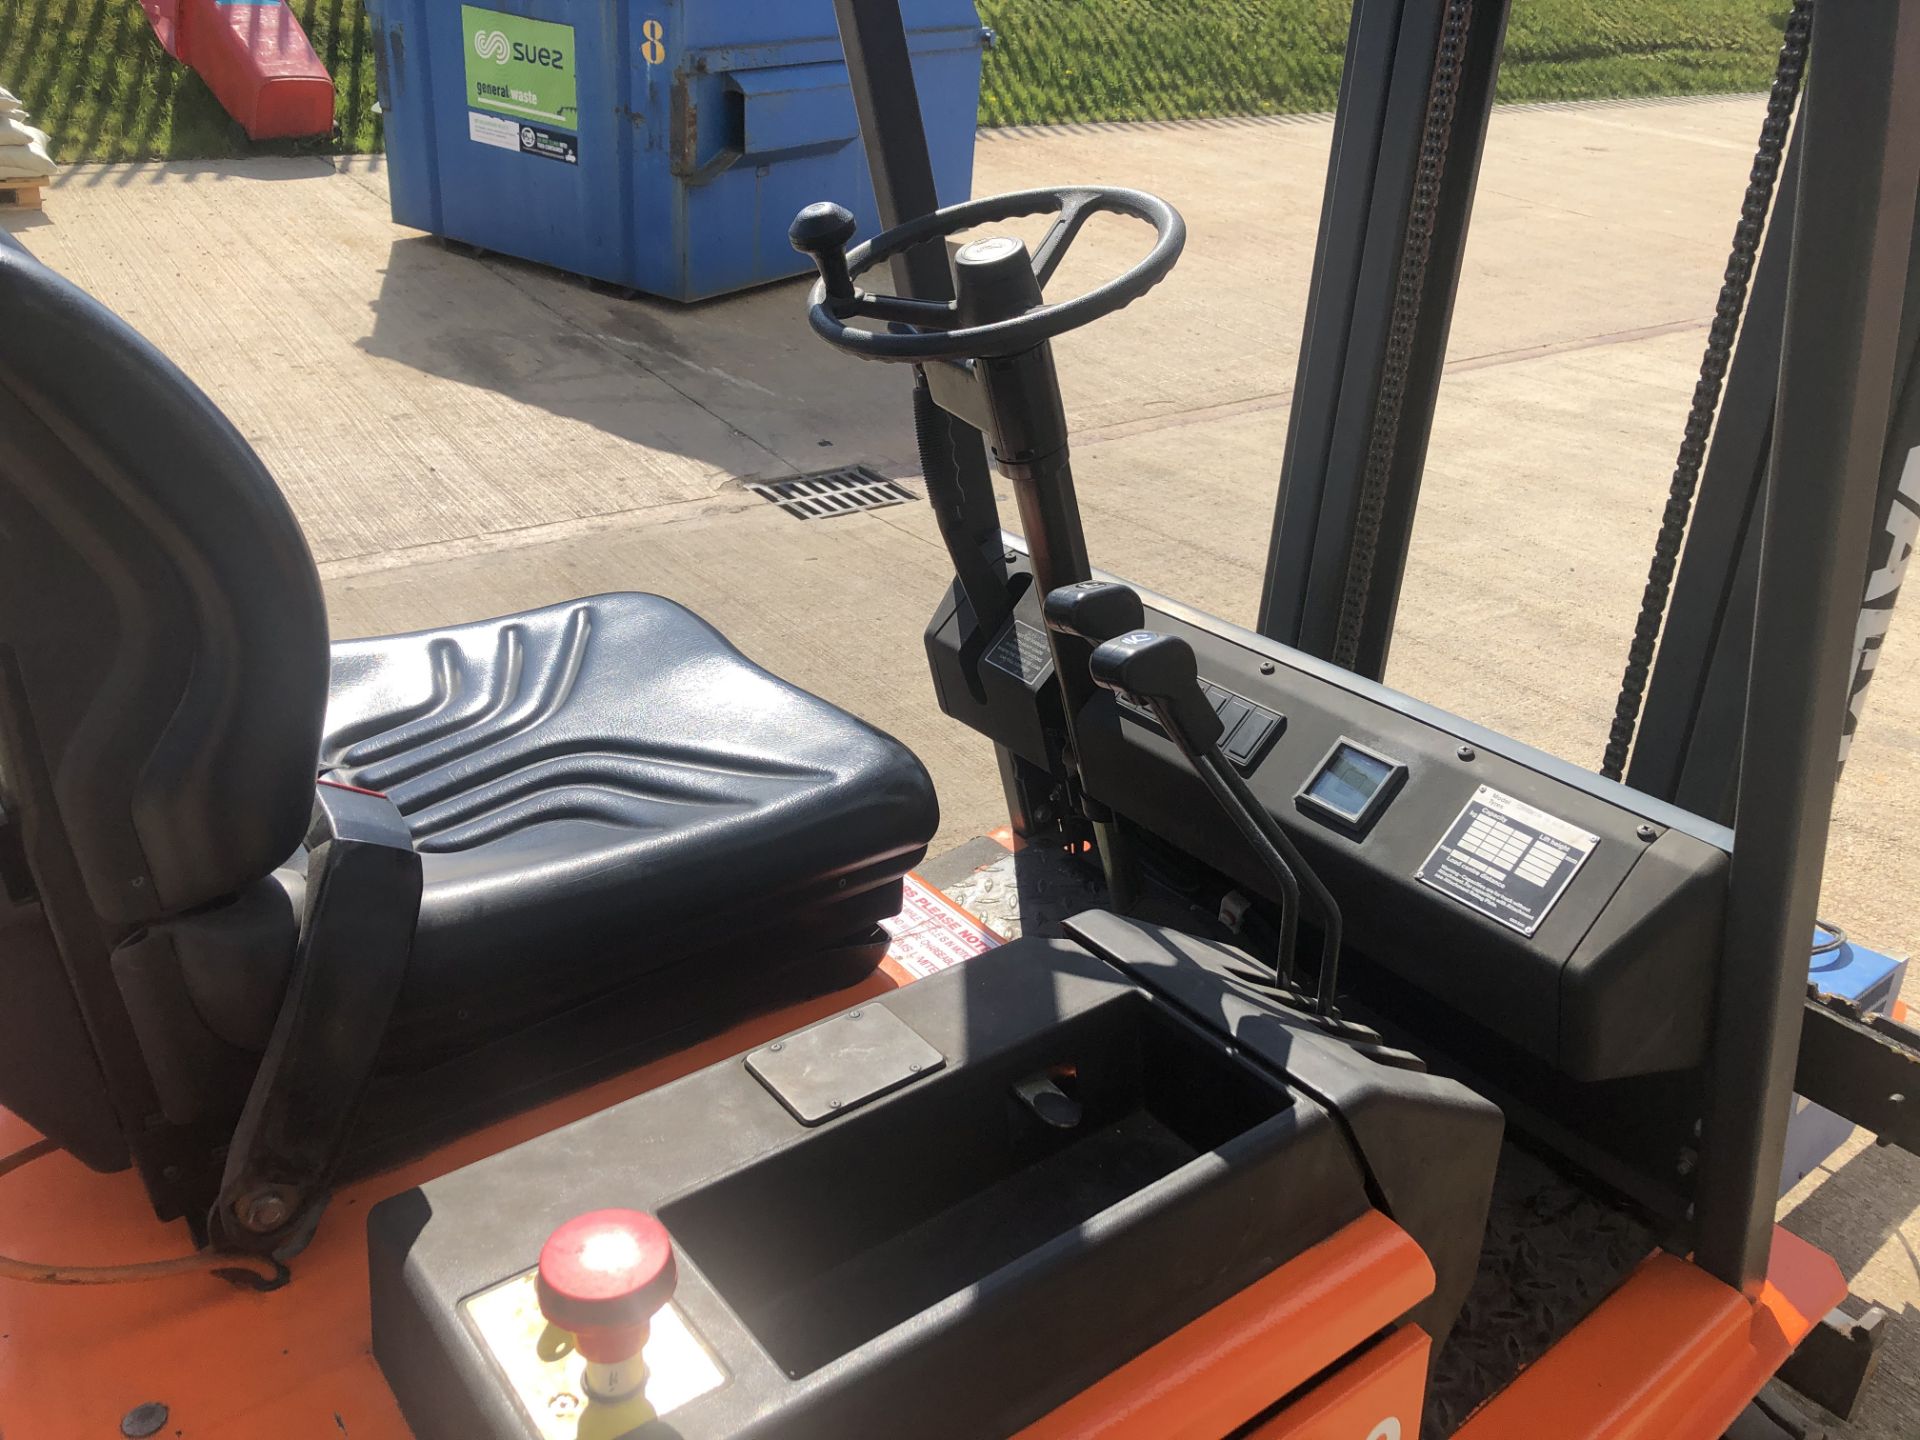 2007 Boss JE10 Forklift - fully working 1616 hours - Image 3 of 4